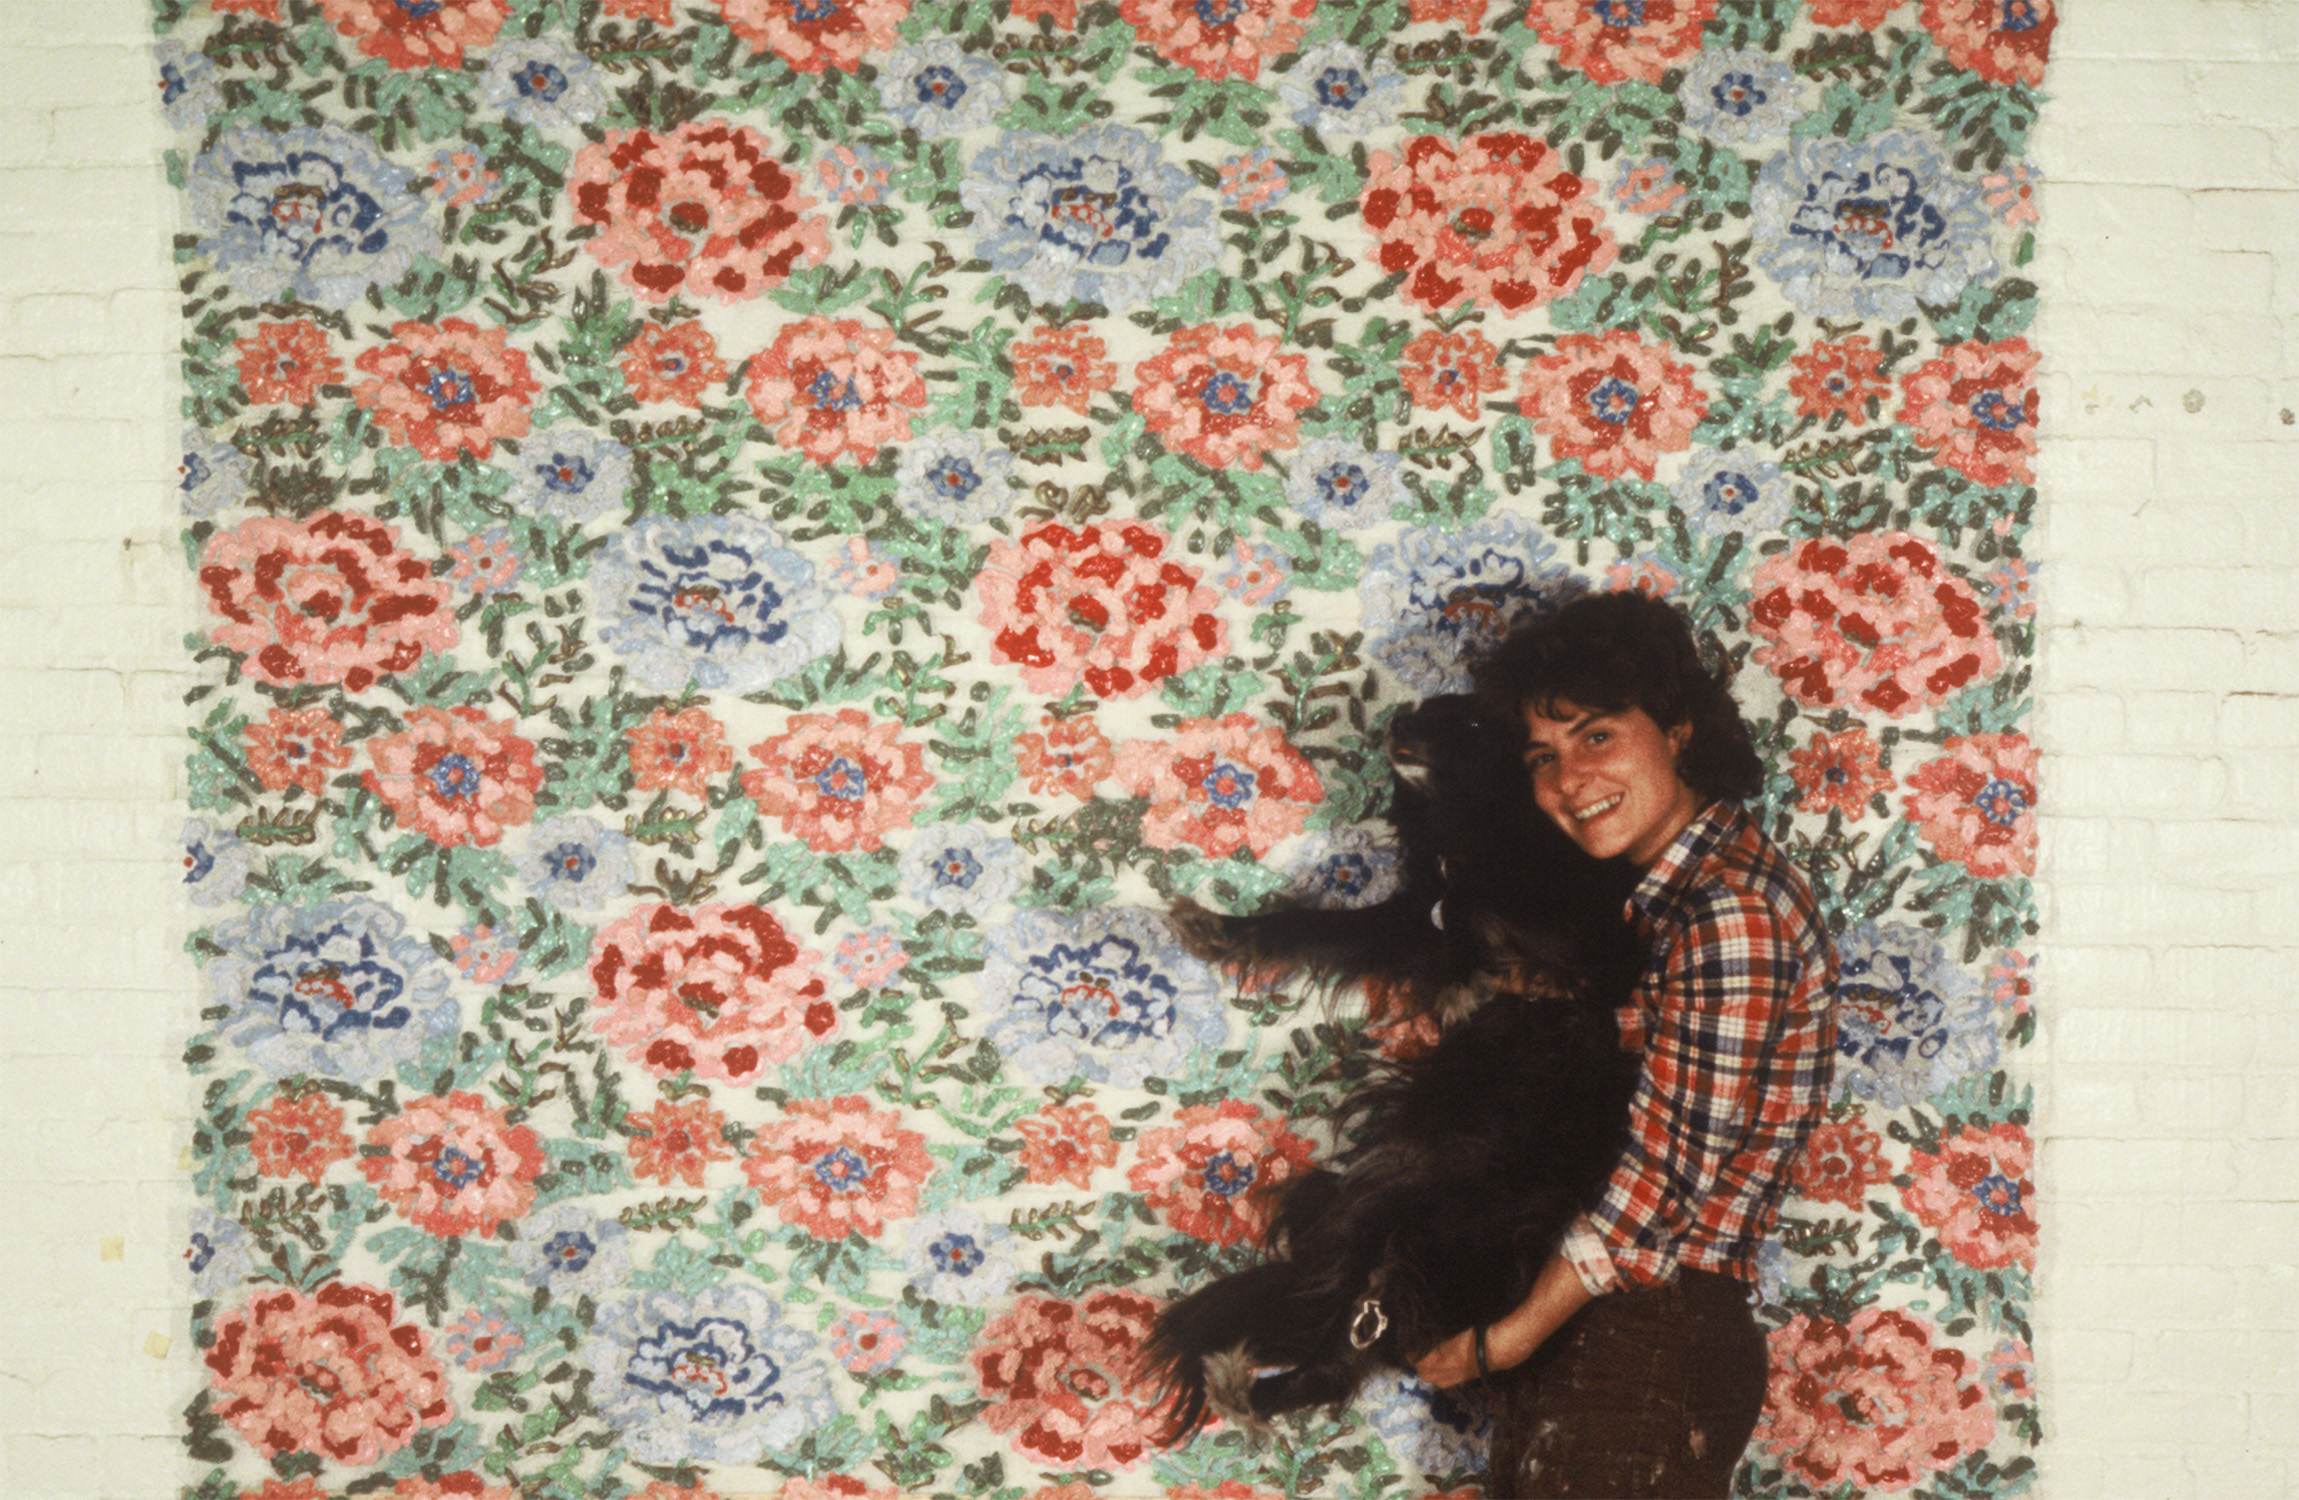 A woman holding a dog in front of a flowered backdrop covering a brick wall.